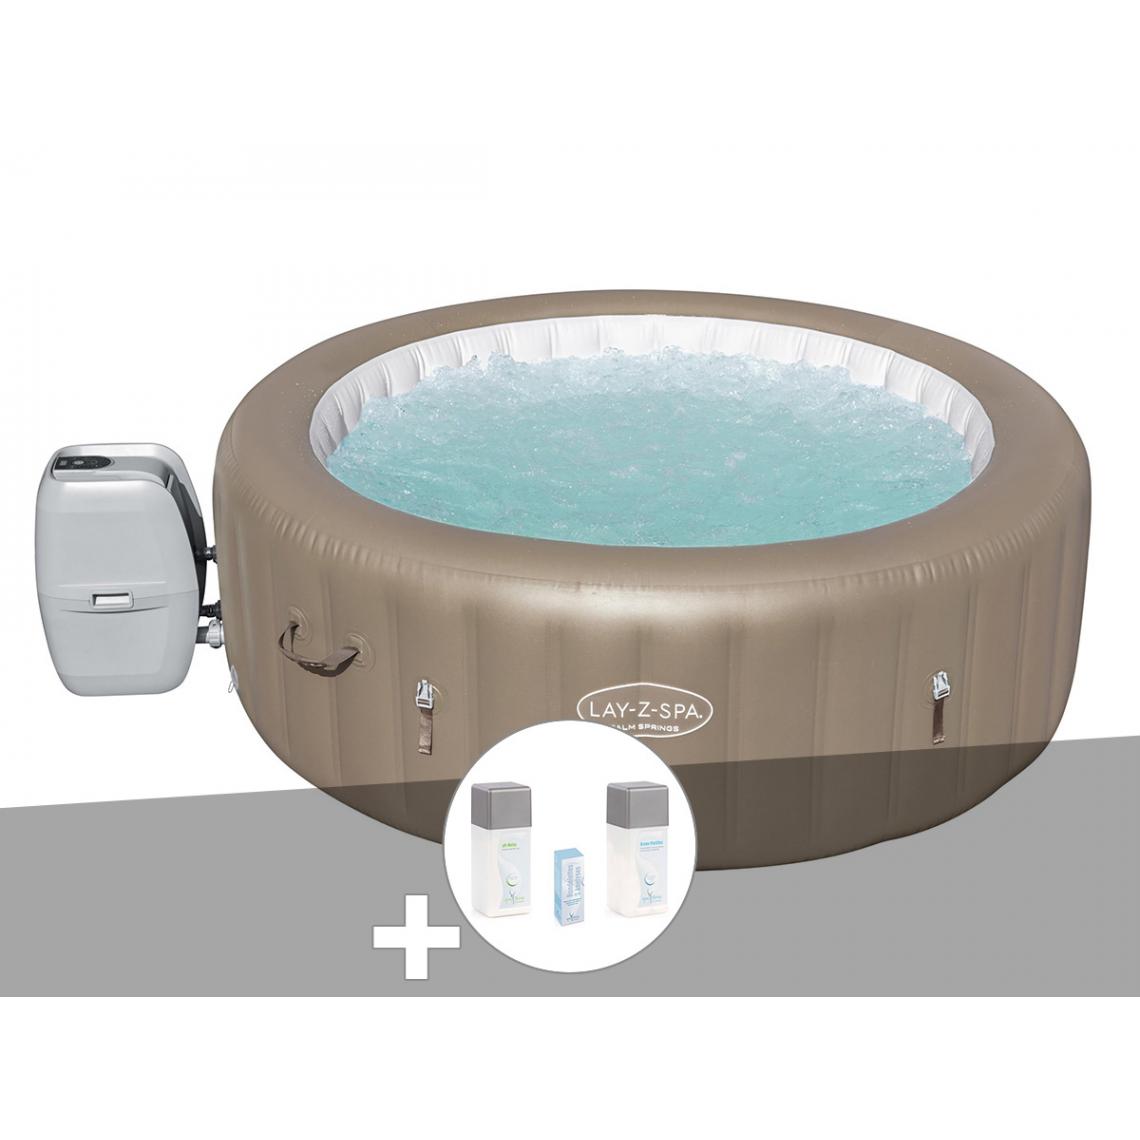 Bestway - Kit spa gonflable Bestway Lay-Z-Spa Palm Springs rond Airjet 4/6 places + Kit traitement brome - Spa gonflable